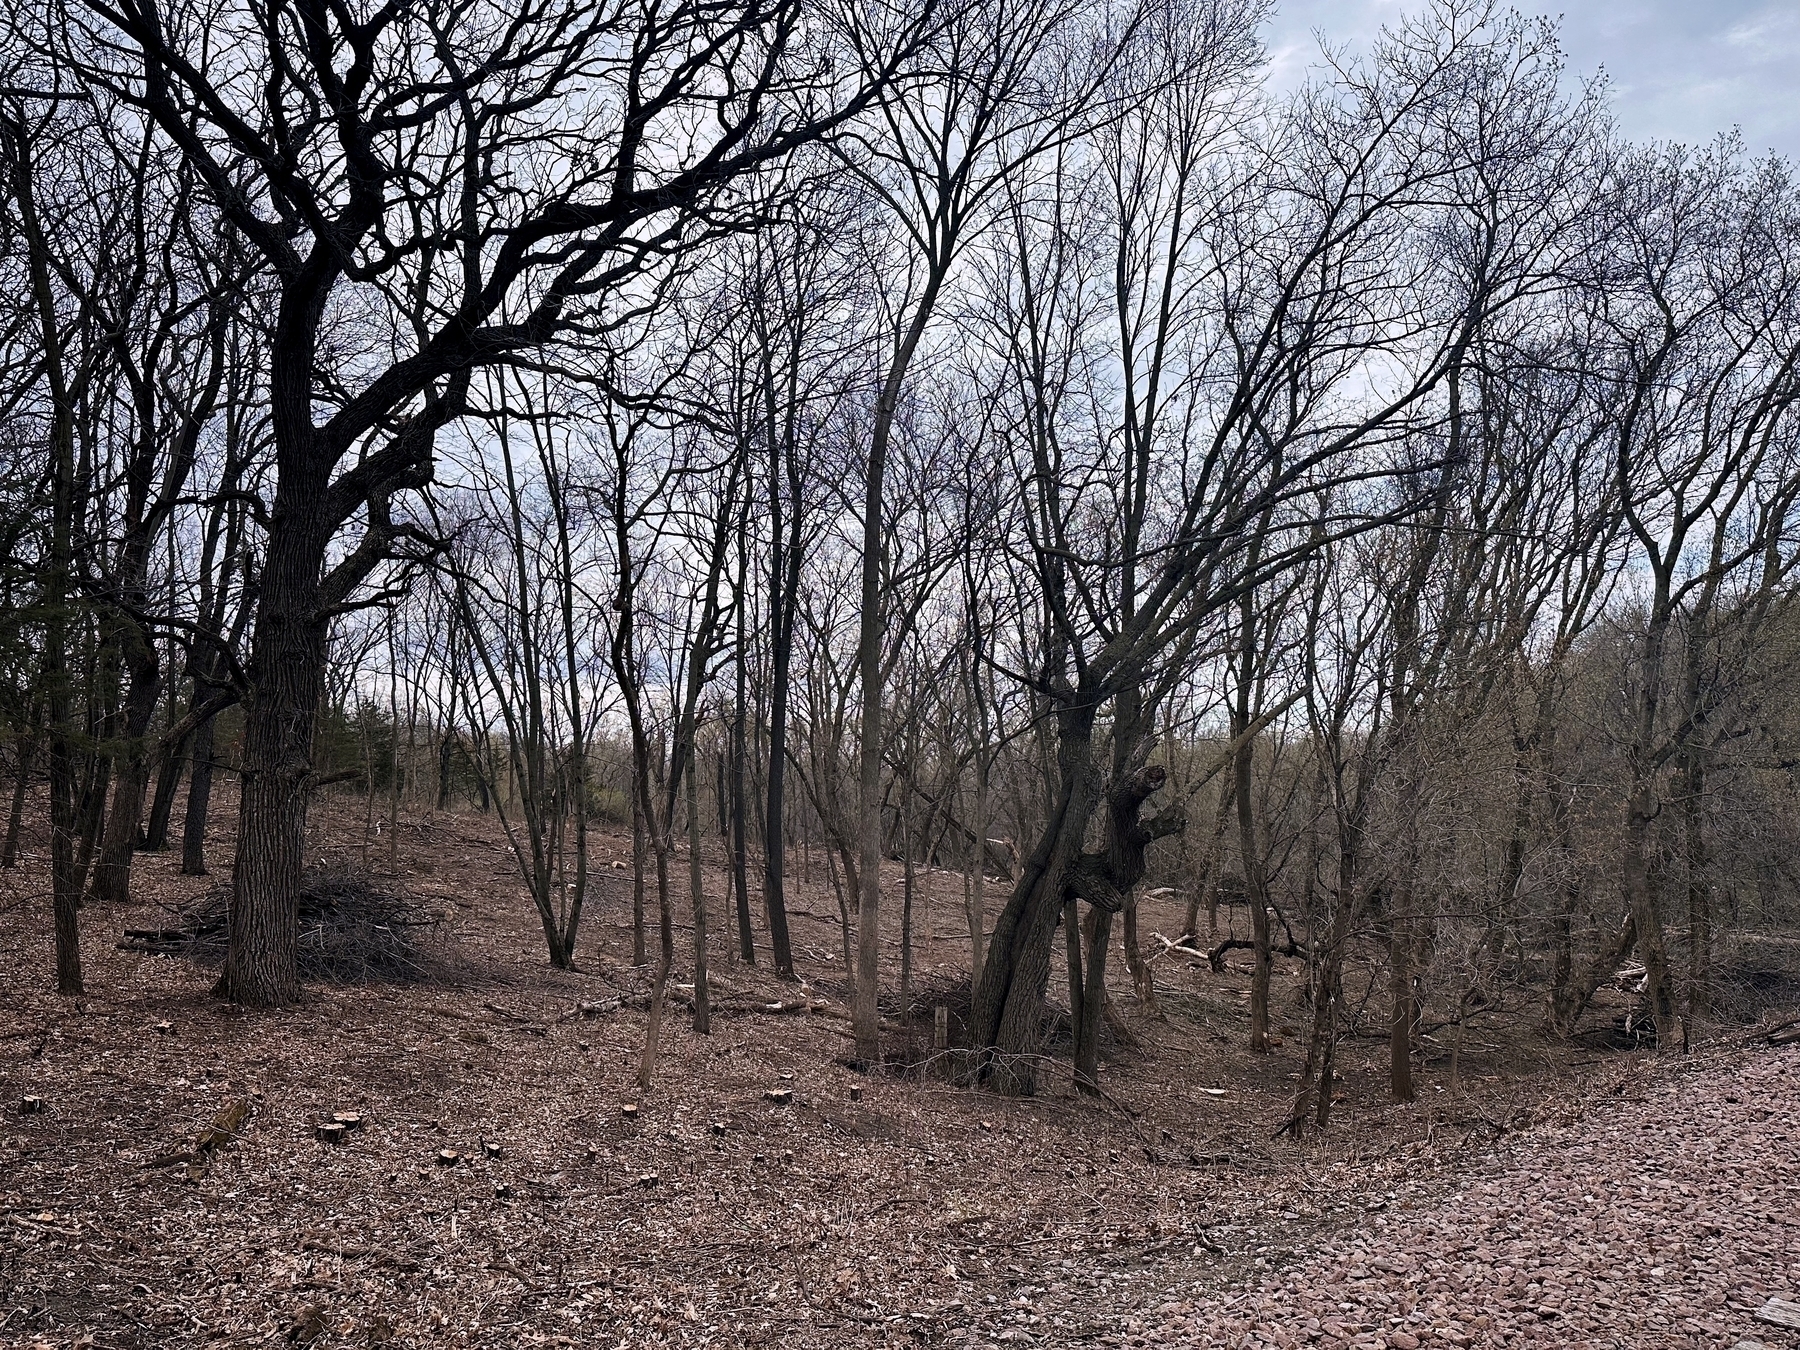 Leafless trees stand in a dry forest with a carpet of fallen leaves, under a cloudy sky.